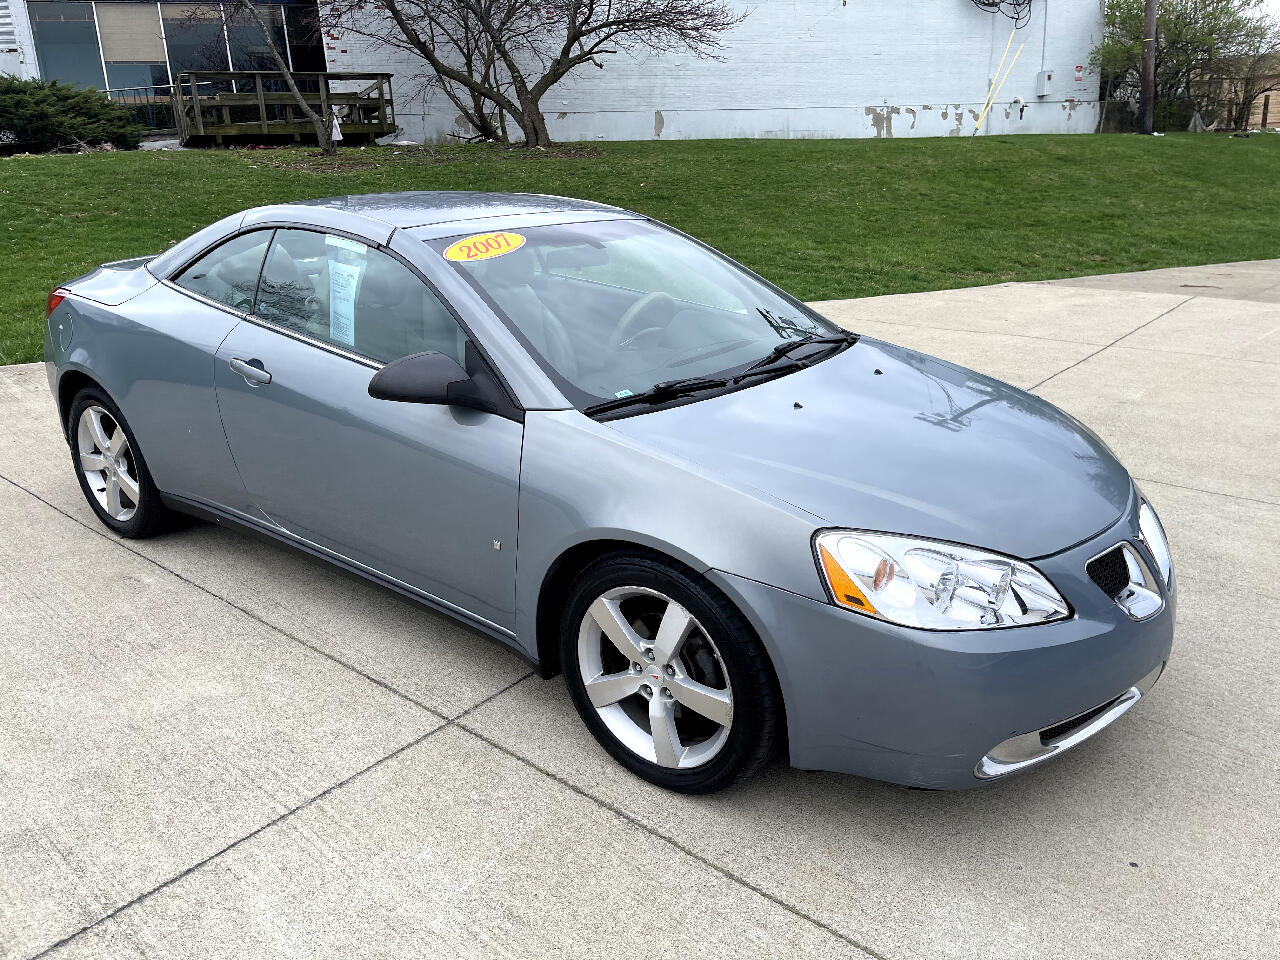 Used 2007 Pontiac G6 GT Convertible for Sale in Lexington KY 40505 Best Buy  Automart II